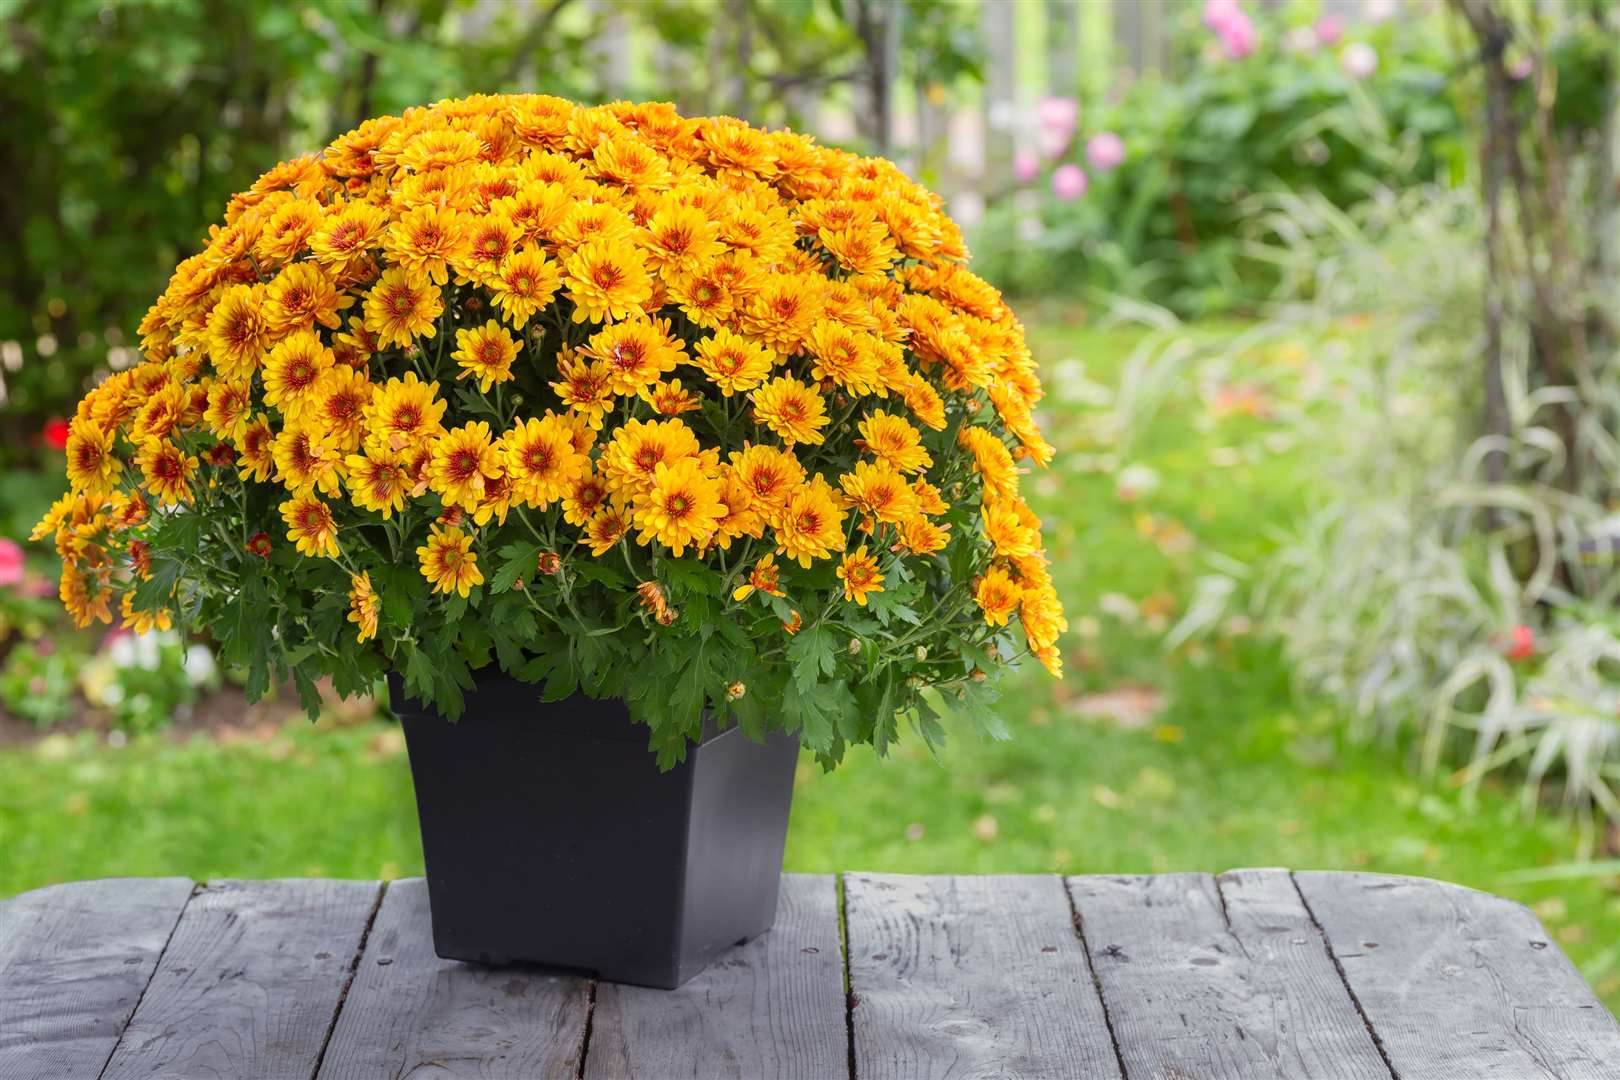 A chrysanthemum in a pot. Picture: iStock/PA